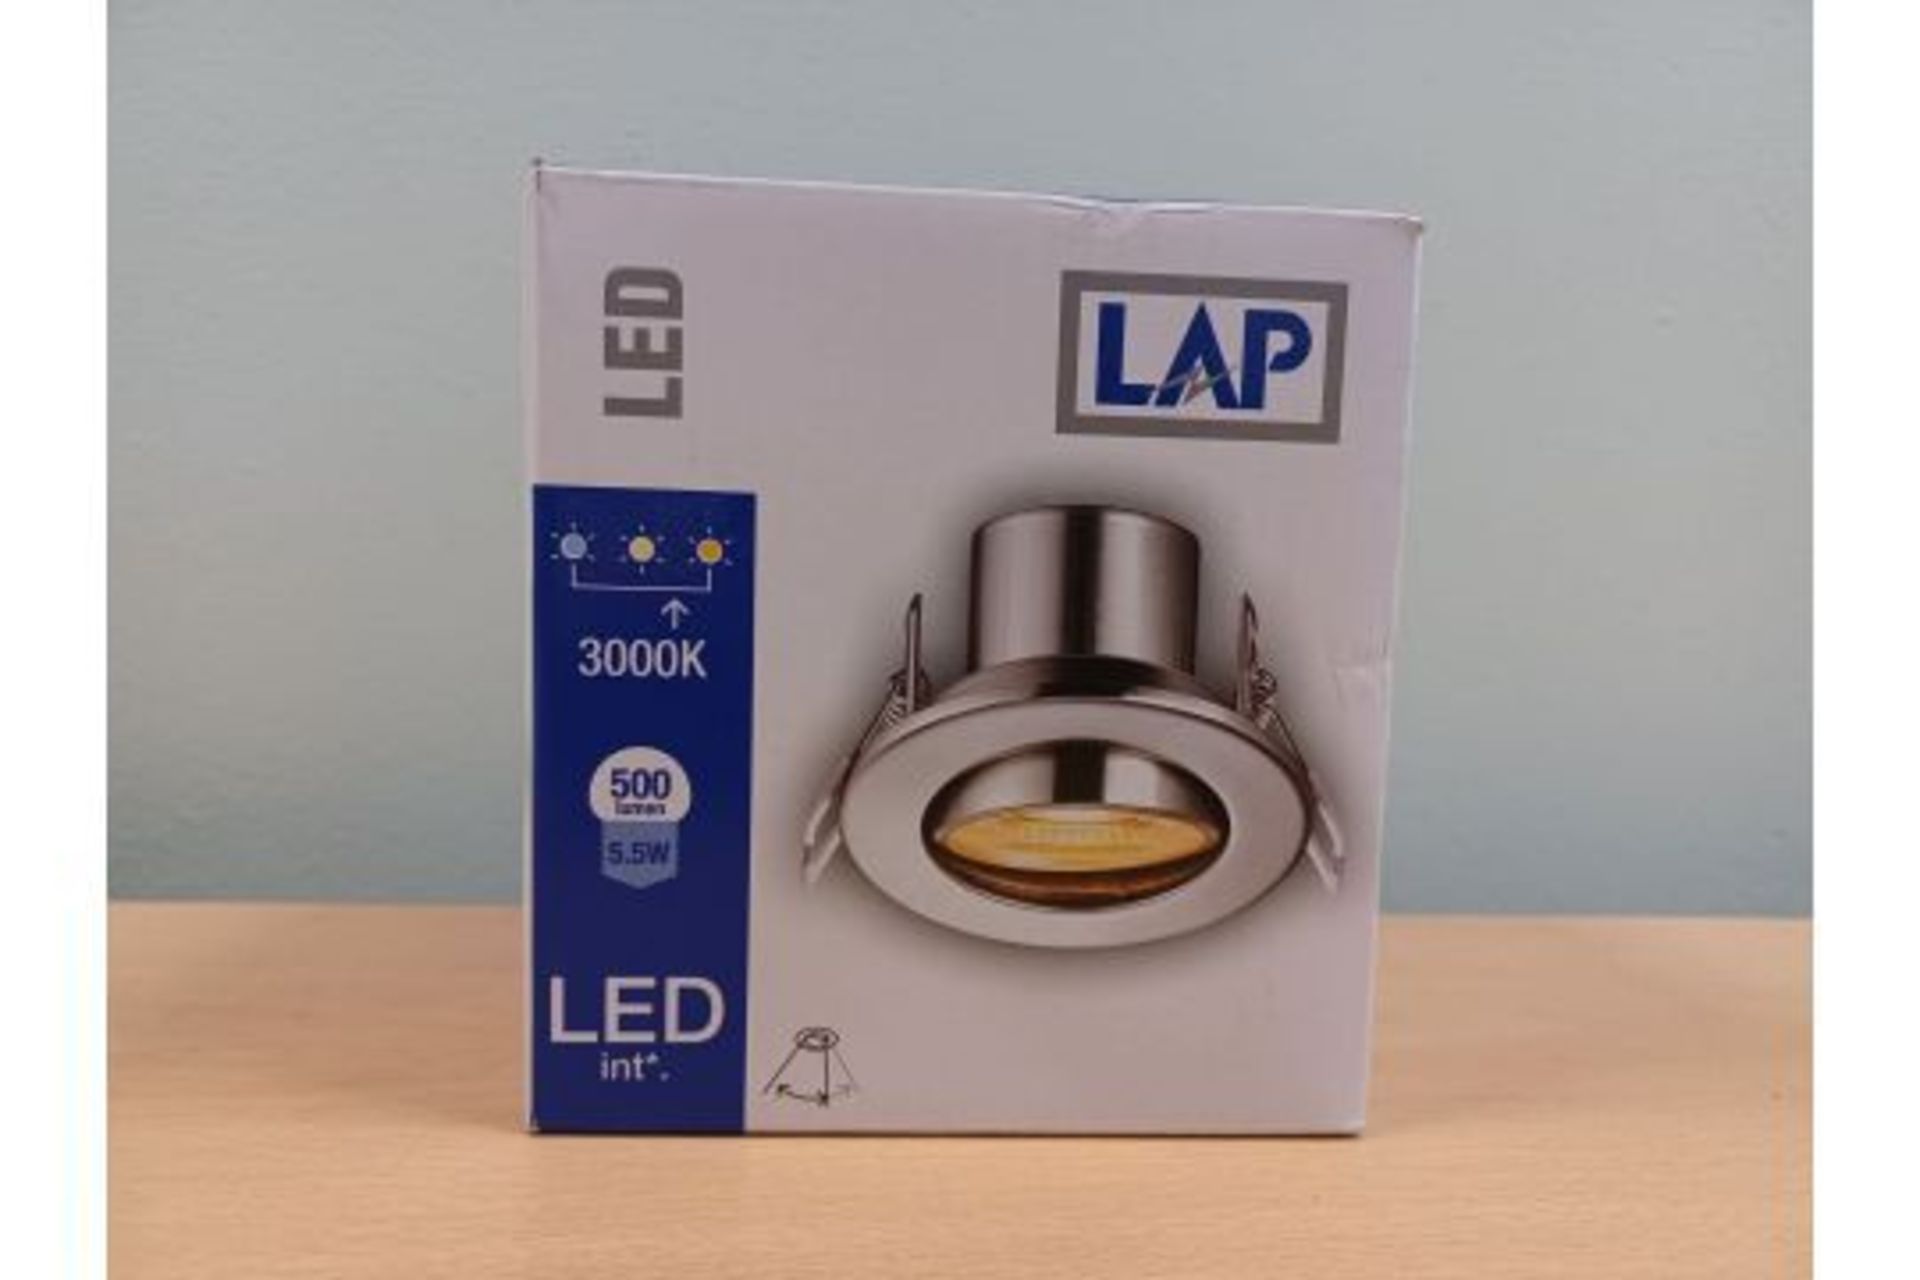 20 X NEW BOXED LAP LED SATIN DOWNLIGHTS. ROTATABLE. 500 LUMEN. 5.5W. 3000K. 20,000 HOURS LIFE. (